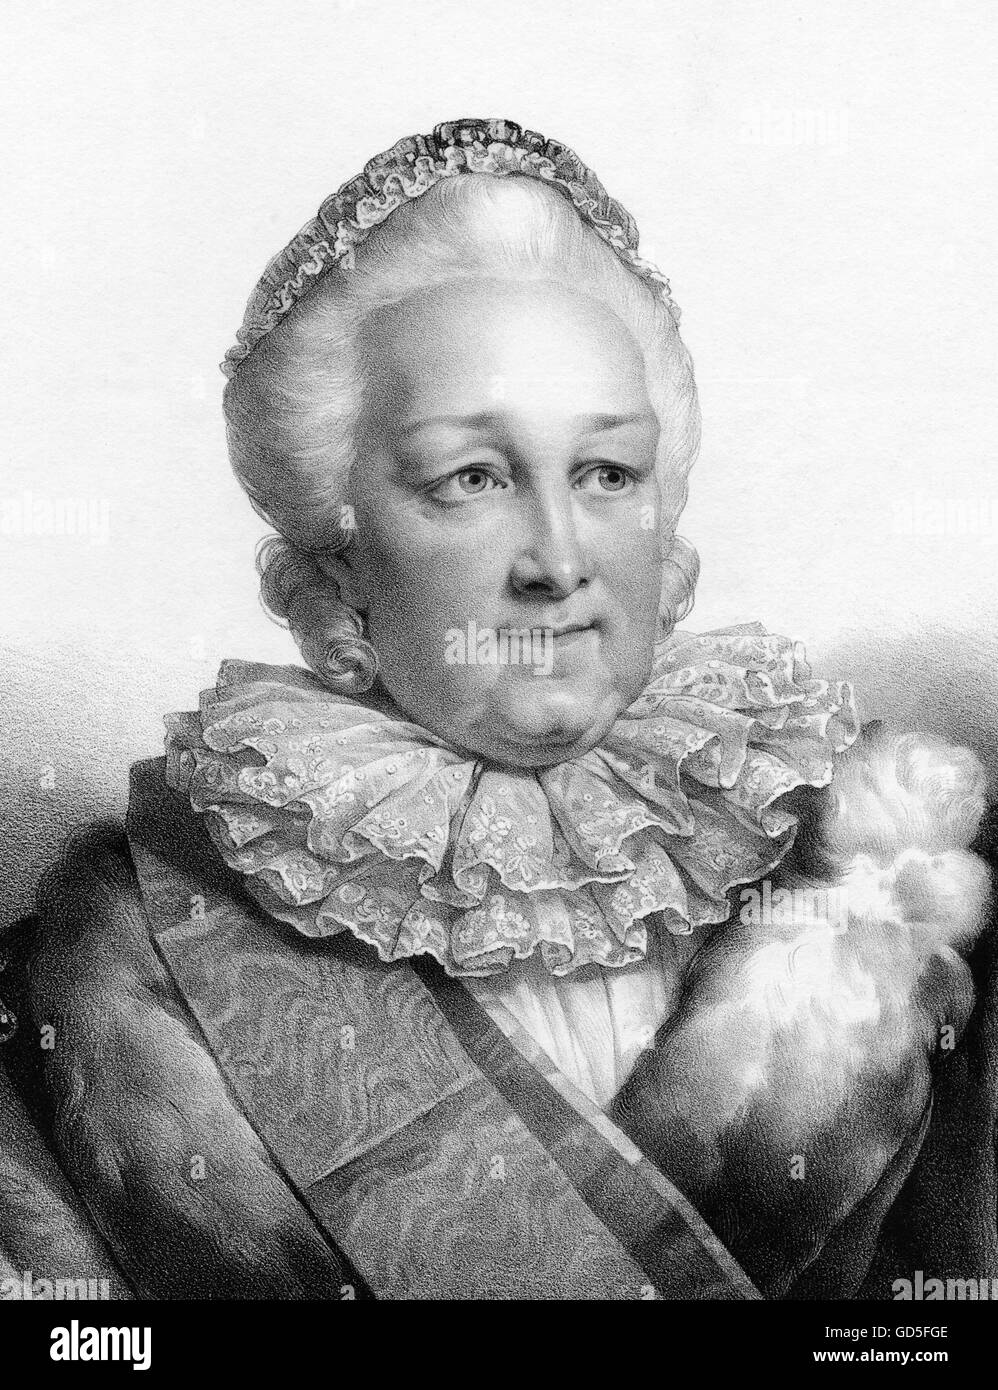 empress-catherine-ii-of-russia-1729-1796-known-as-catherine-the